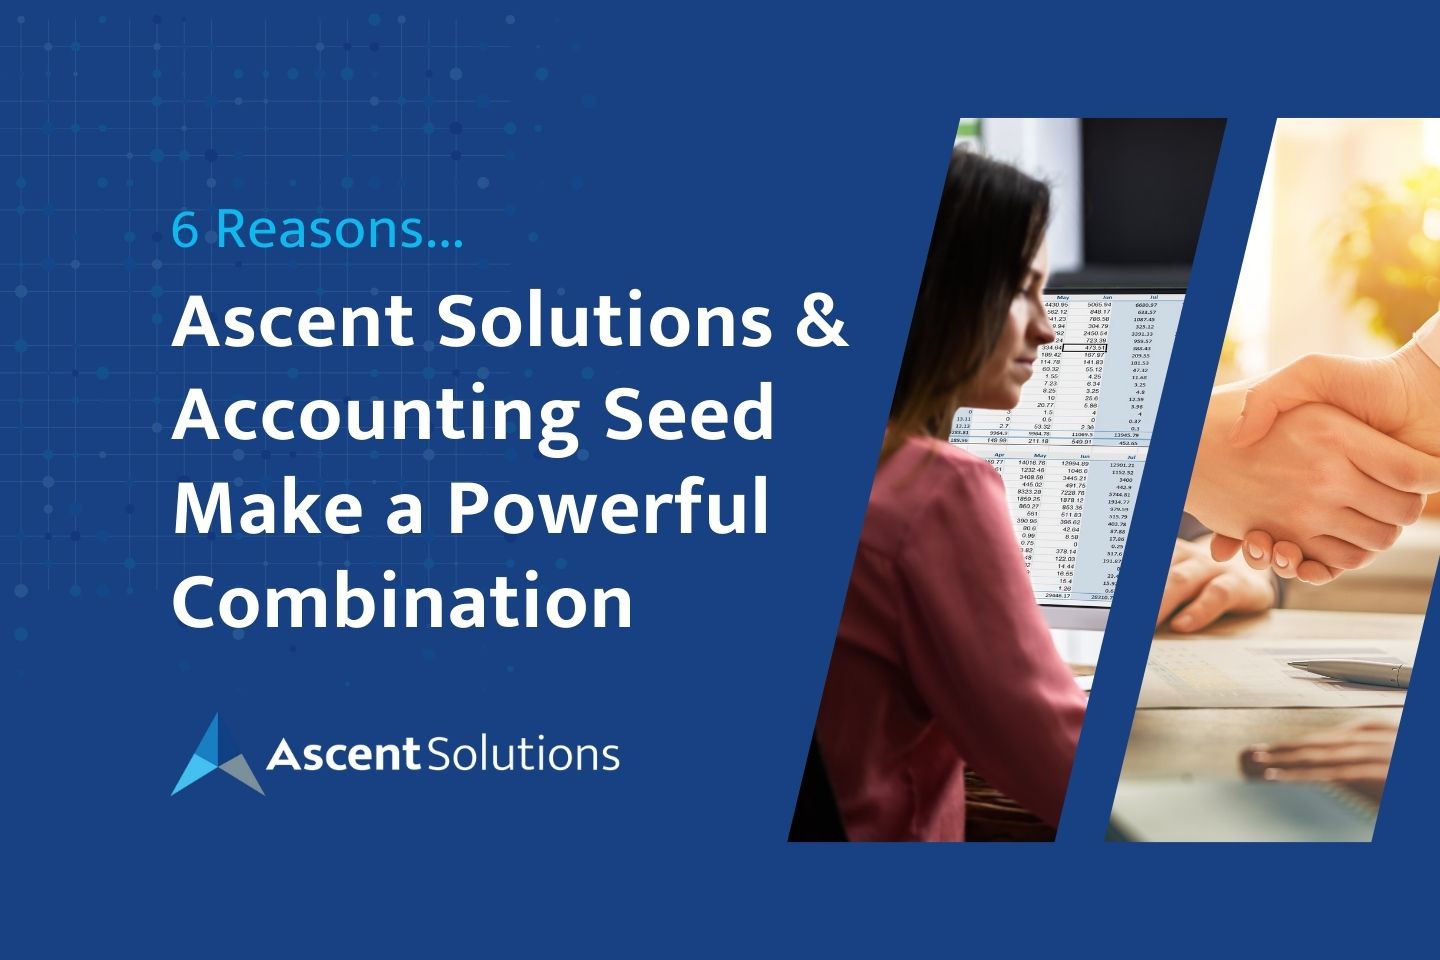 6 Reasons Ascent Solutions and Accounting Seed Make a Powerful Combination